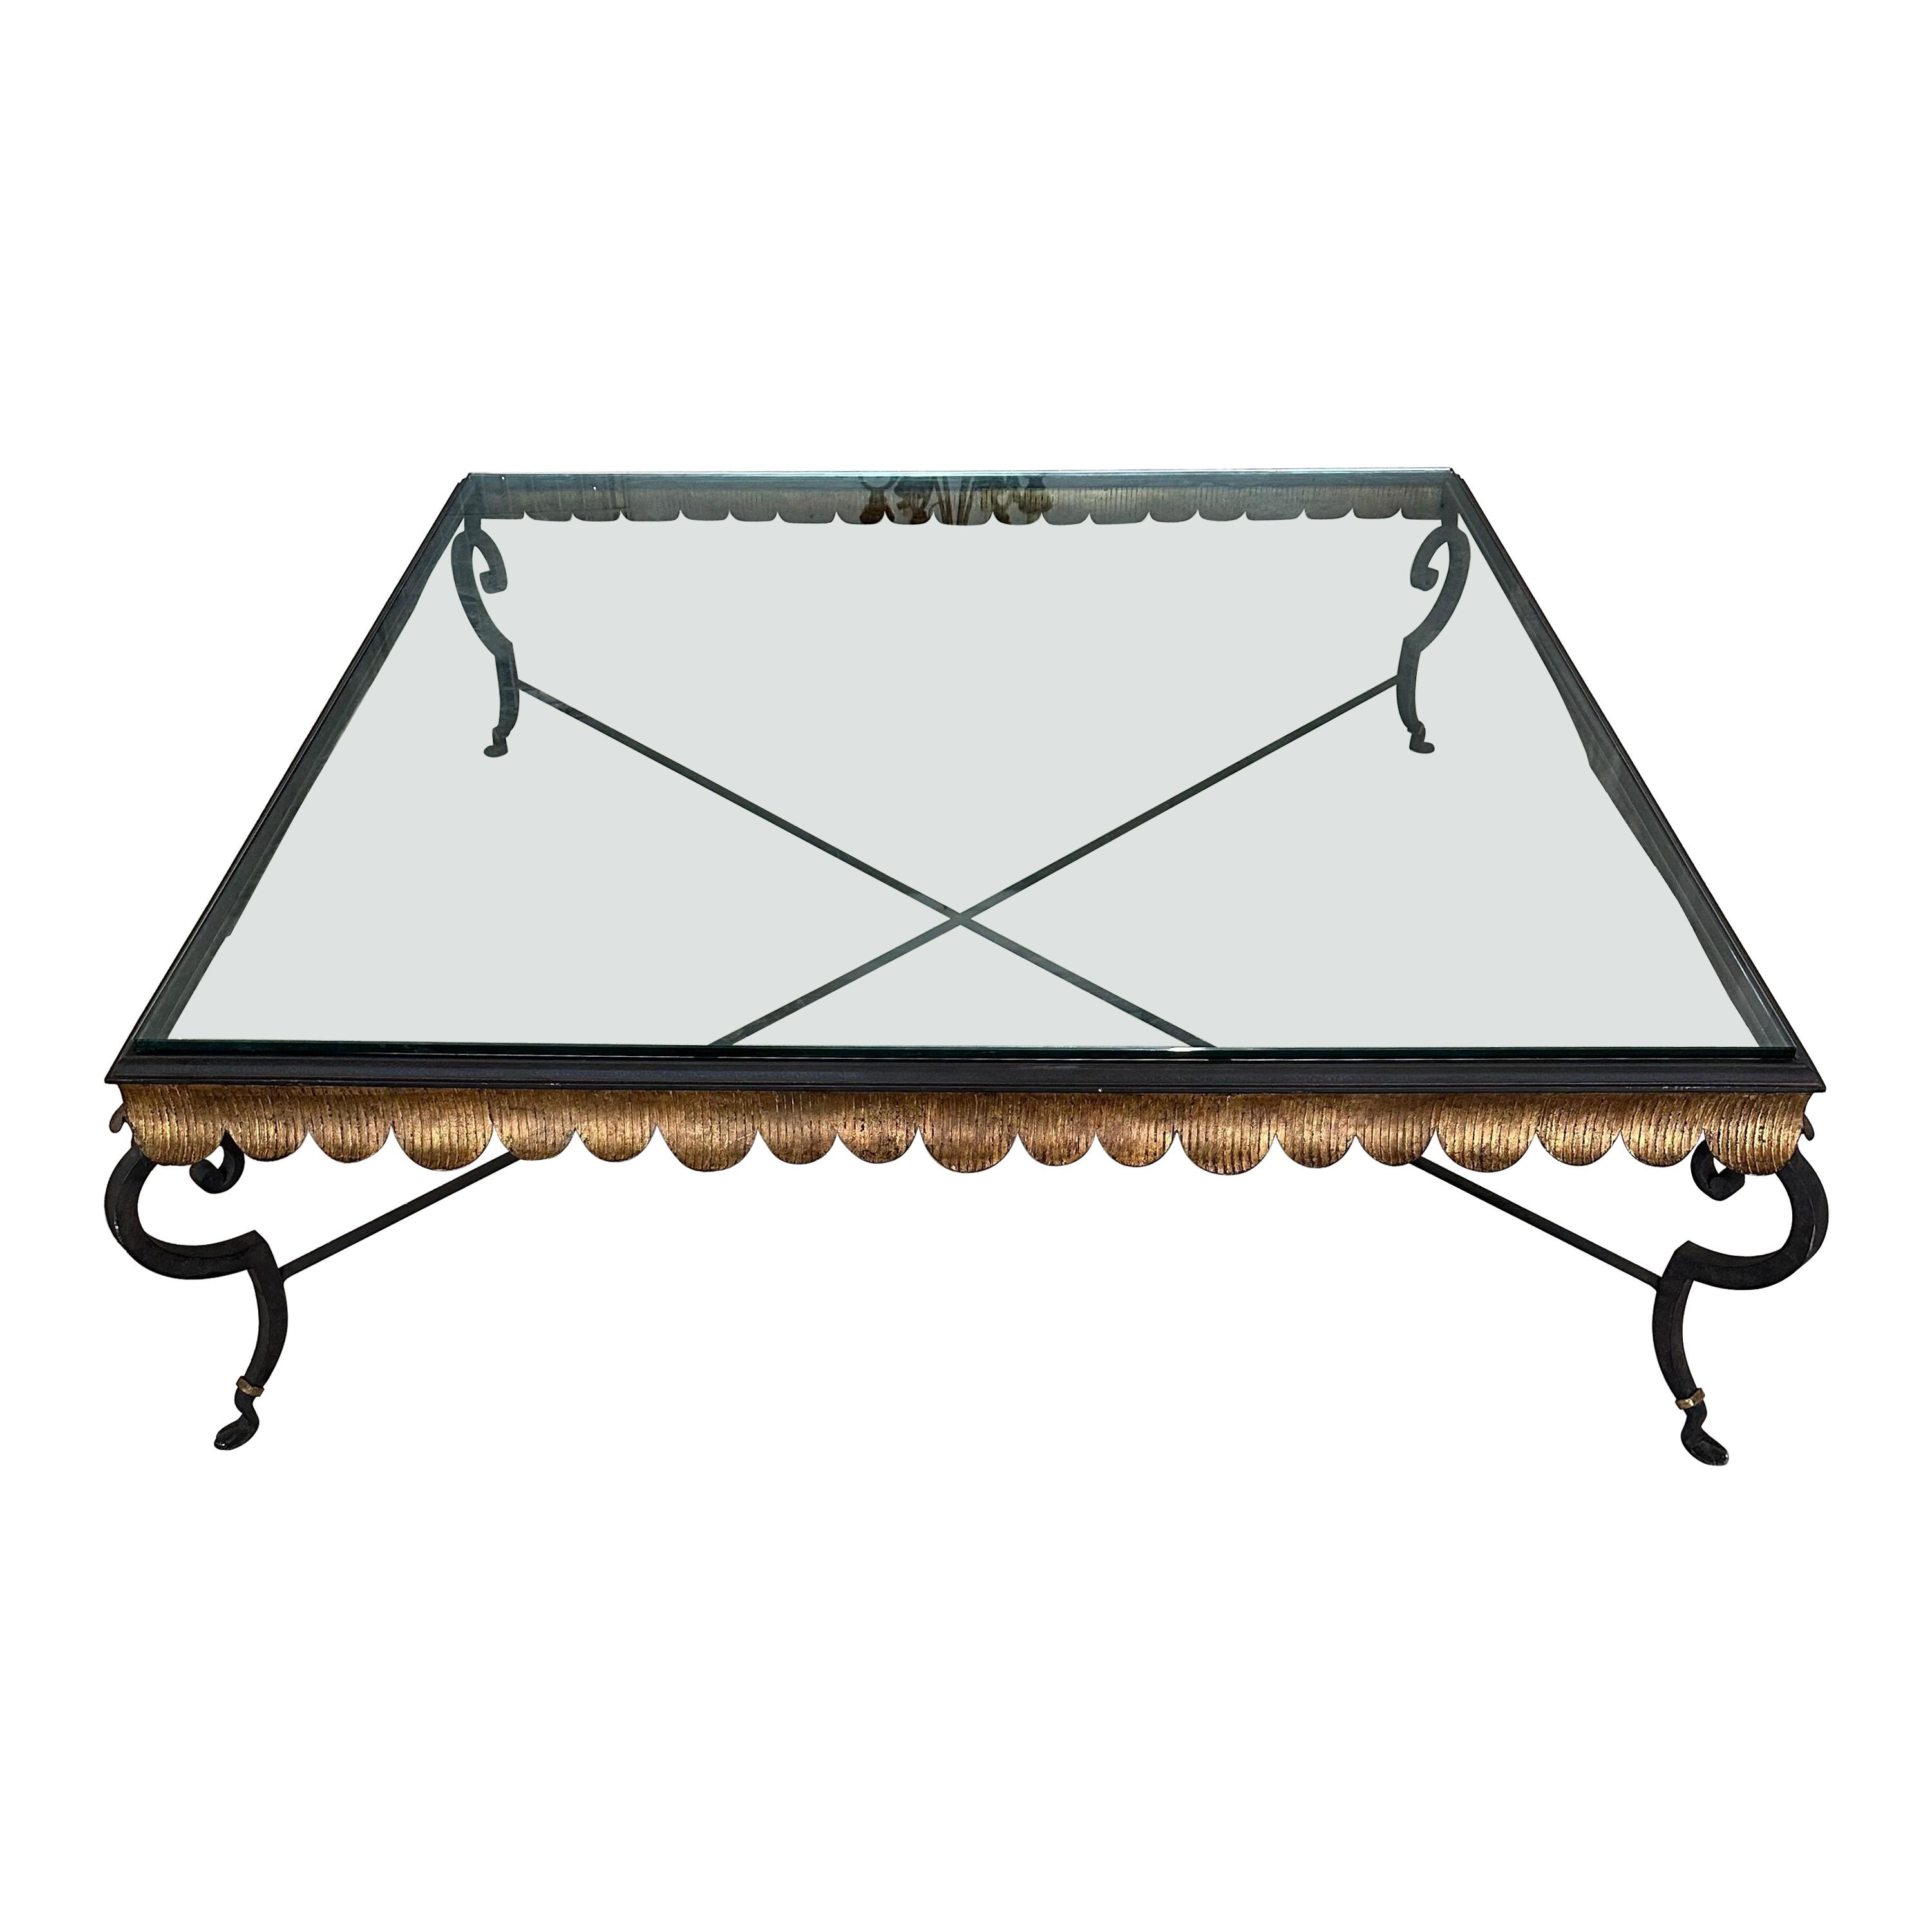 Huge wrought iron and Glass Neoclassical French Style Coffee Table For Sale